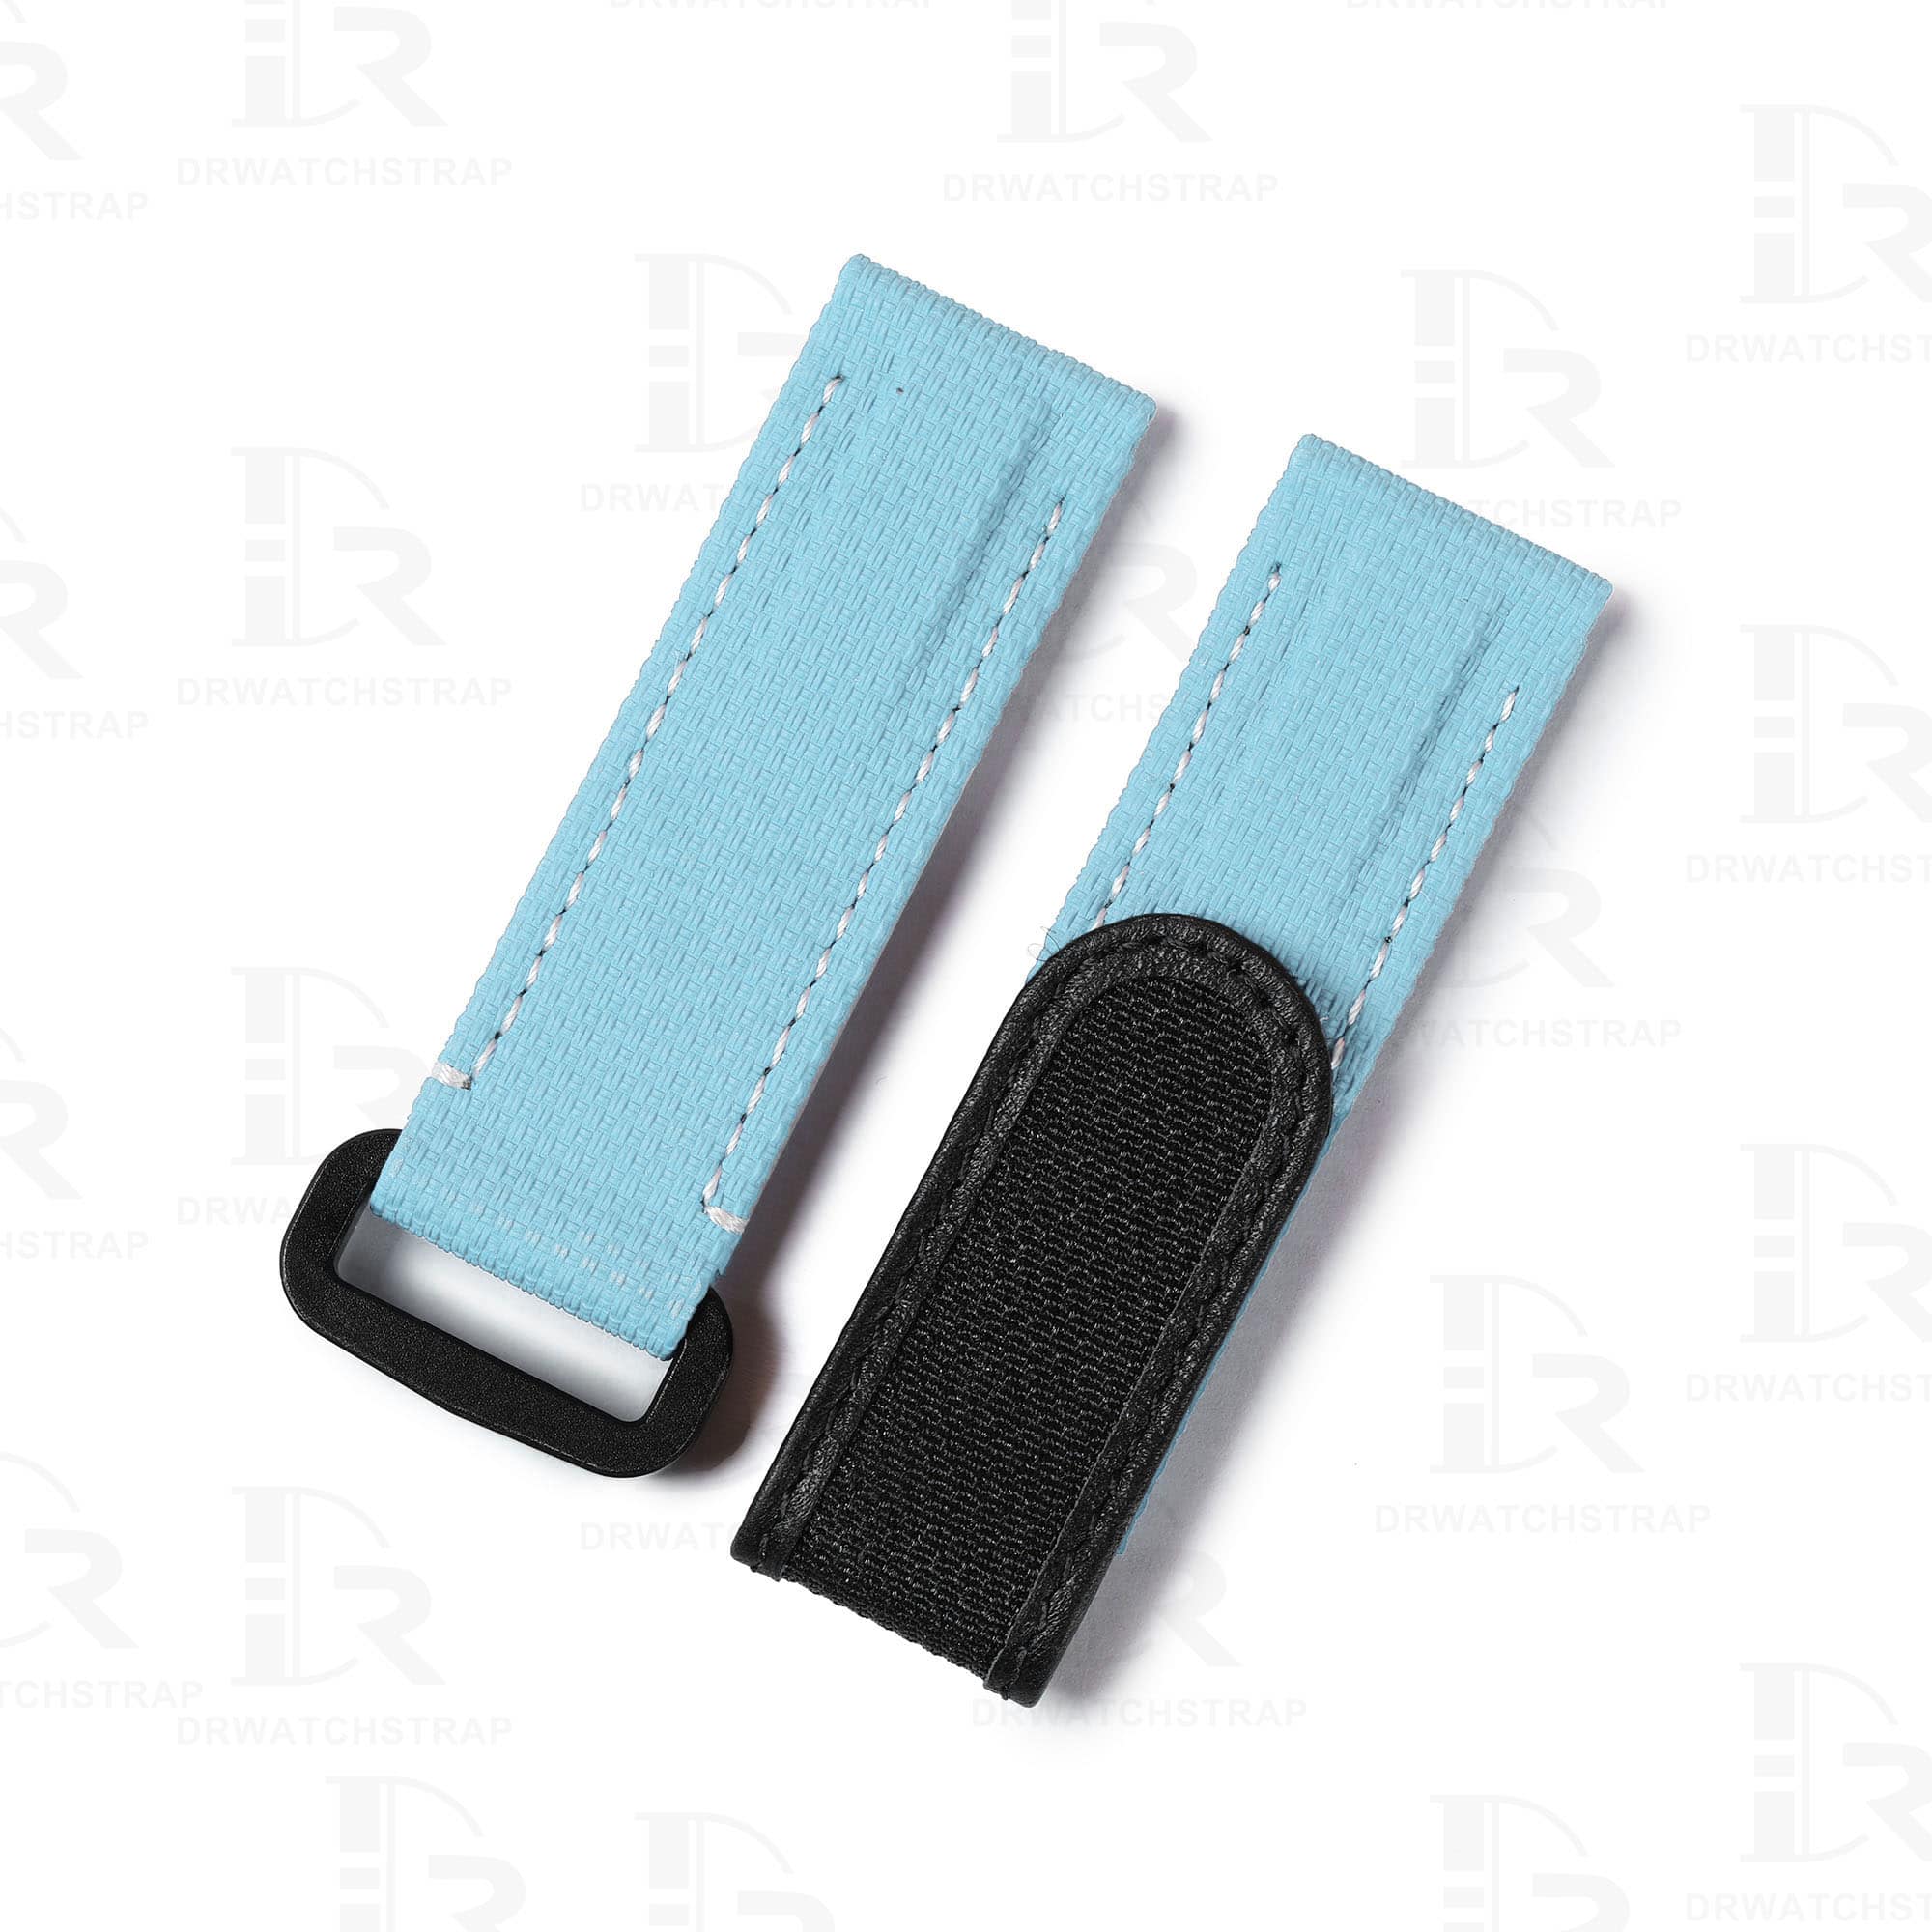 Custom best quality canvas light blue replacement velcro rubber band bracelets and watch straps online for Rolex, Blancpain, Omega, and any other man or women watches with flat ends watch bands at a low price